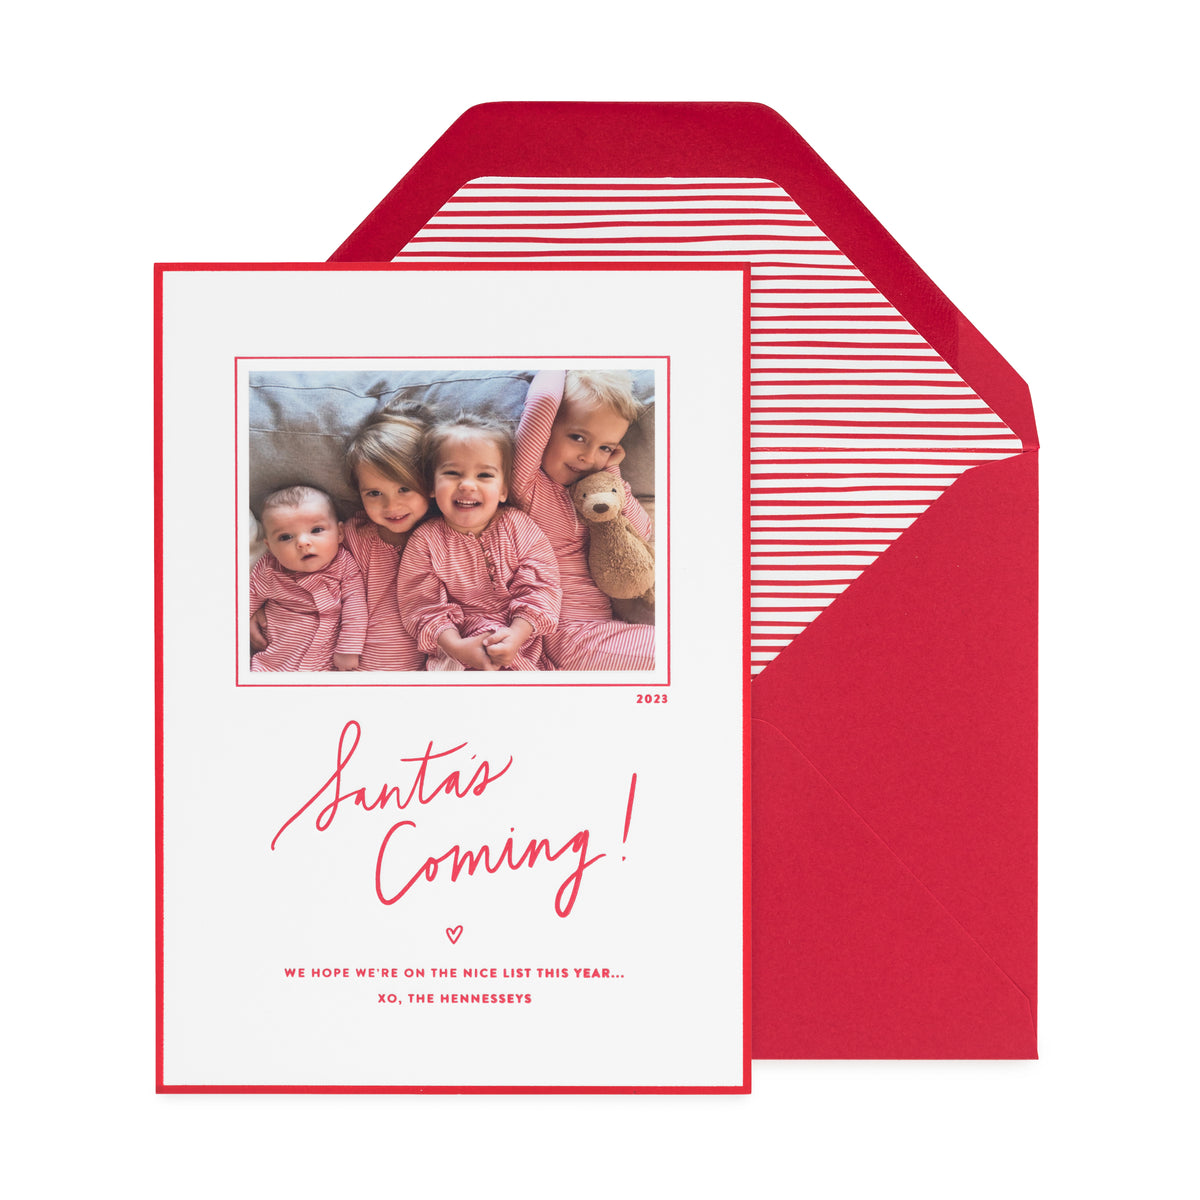 photo holiday card with red ink and border on white paper, red stripe liner, red envelope